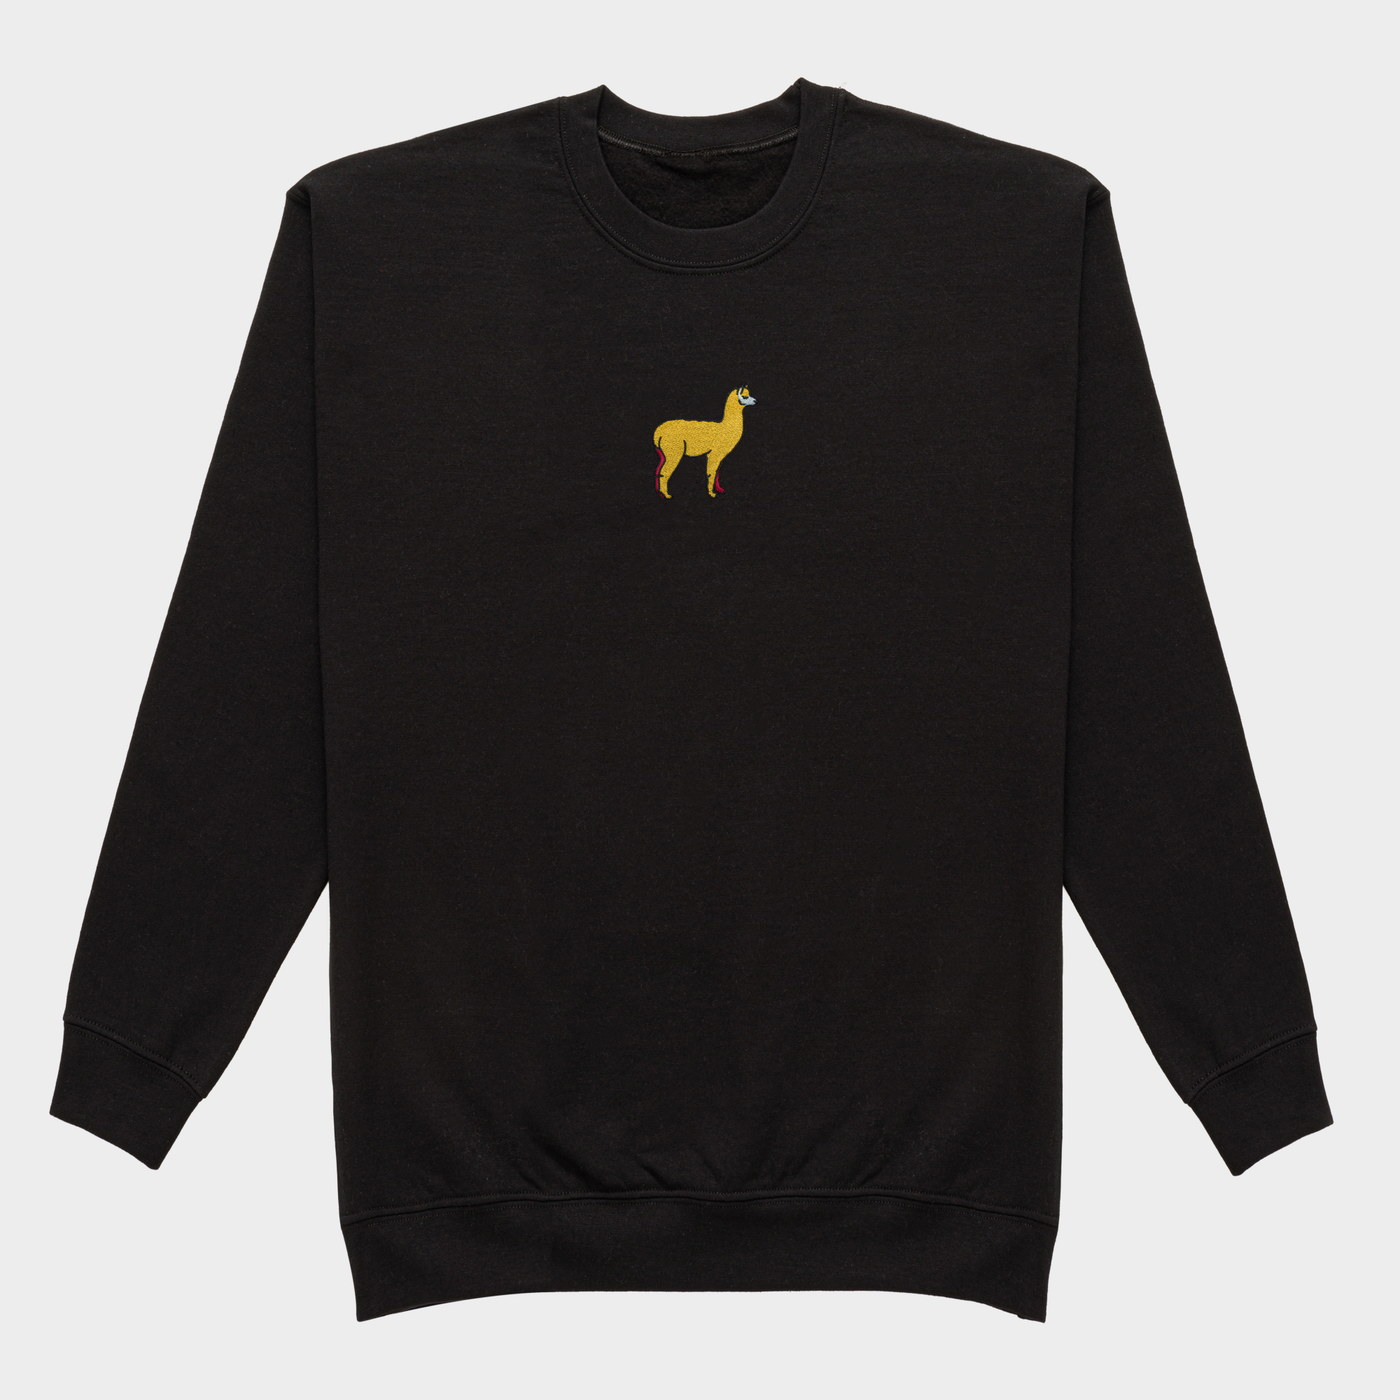 Bobby's Planet Men's Embroidered Alpaca Sweatshirt from South American Amazon Animals Collection in Black Color#color_black